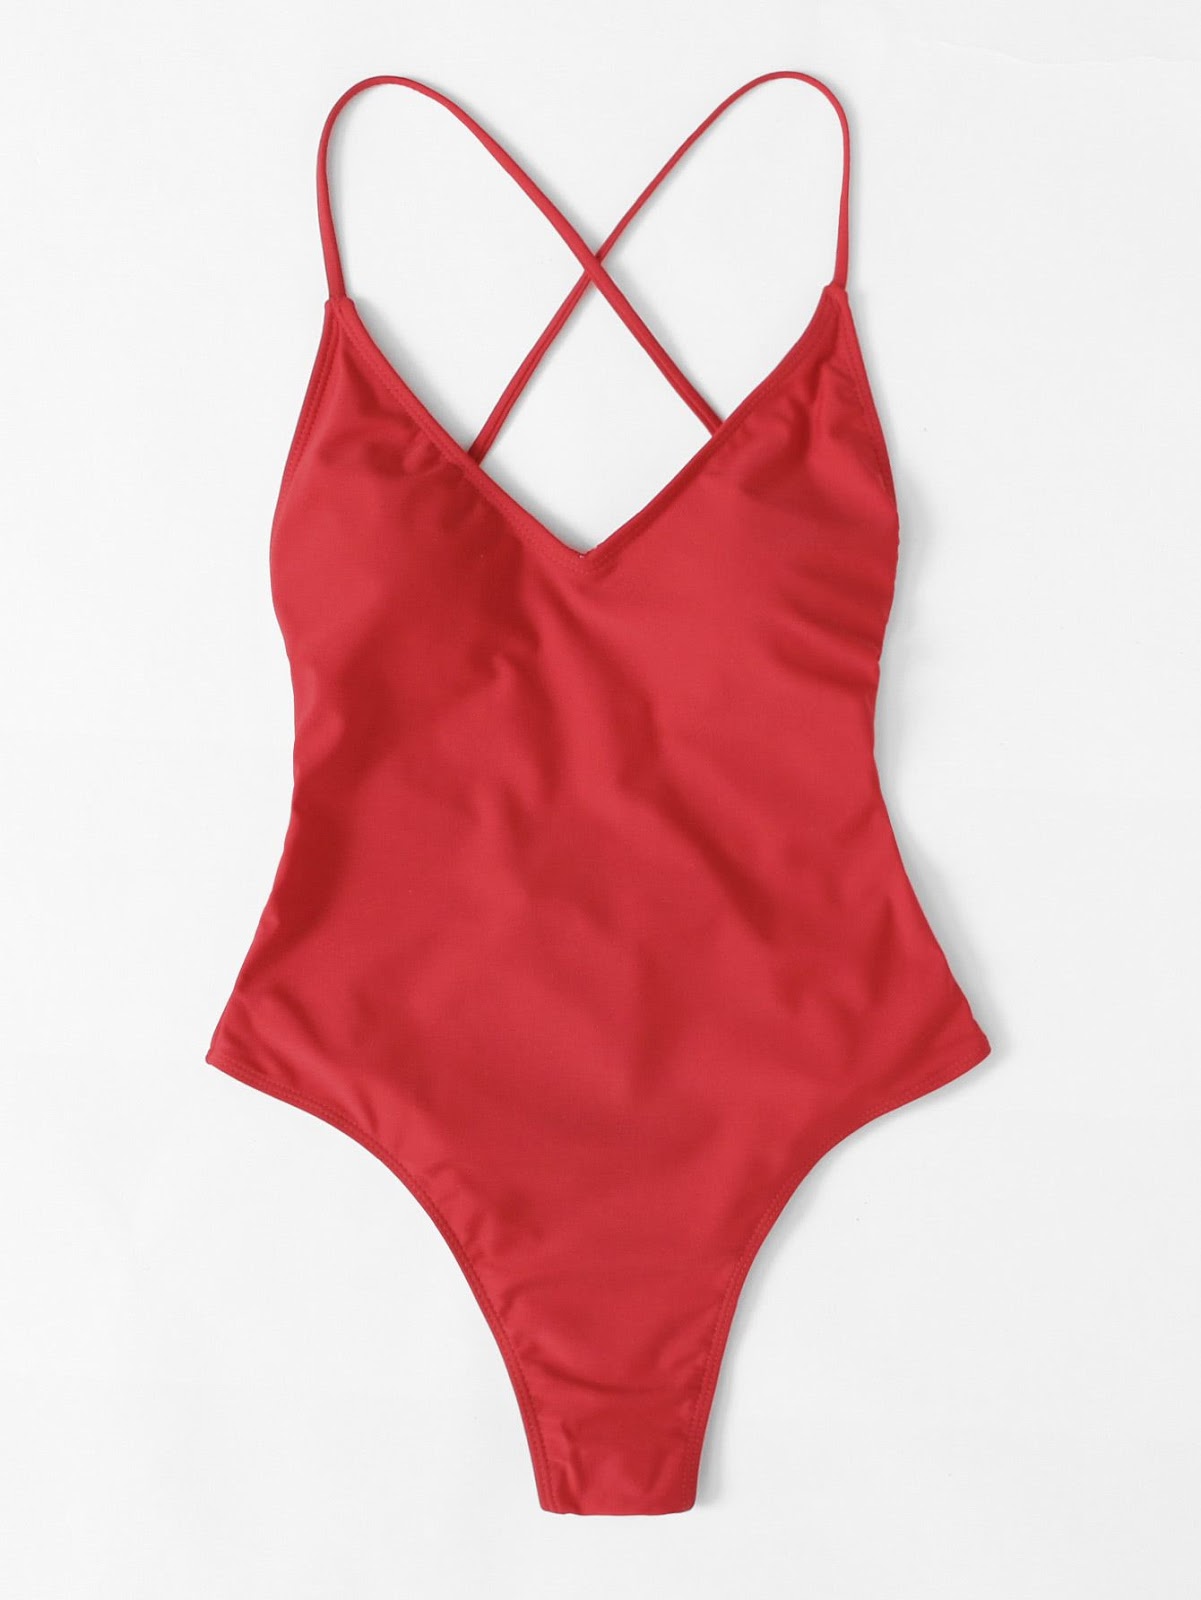 Why You Should Prefer Online Shopping For Swimsuits And Other Items